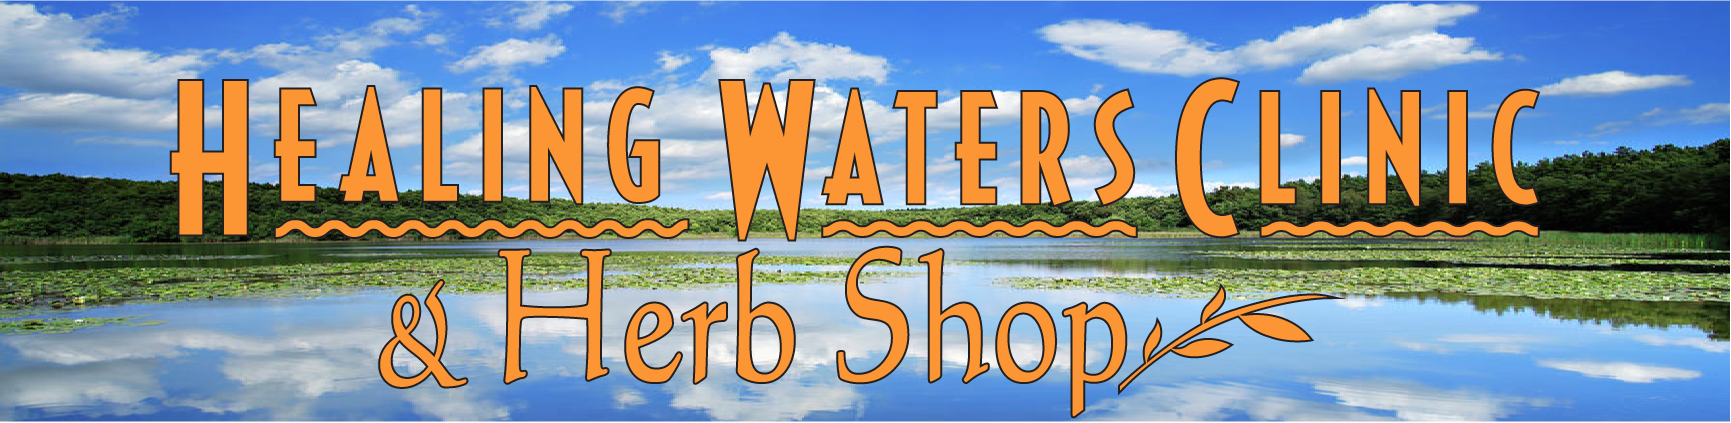 healing waters clinic waterfront header